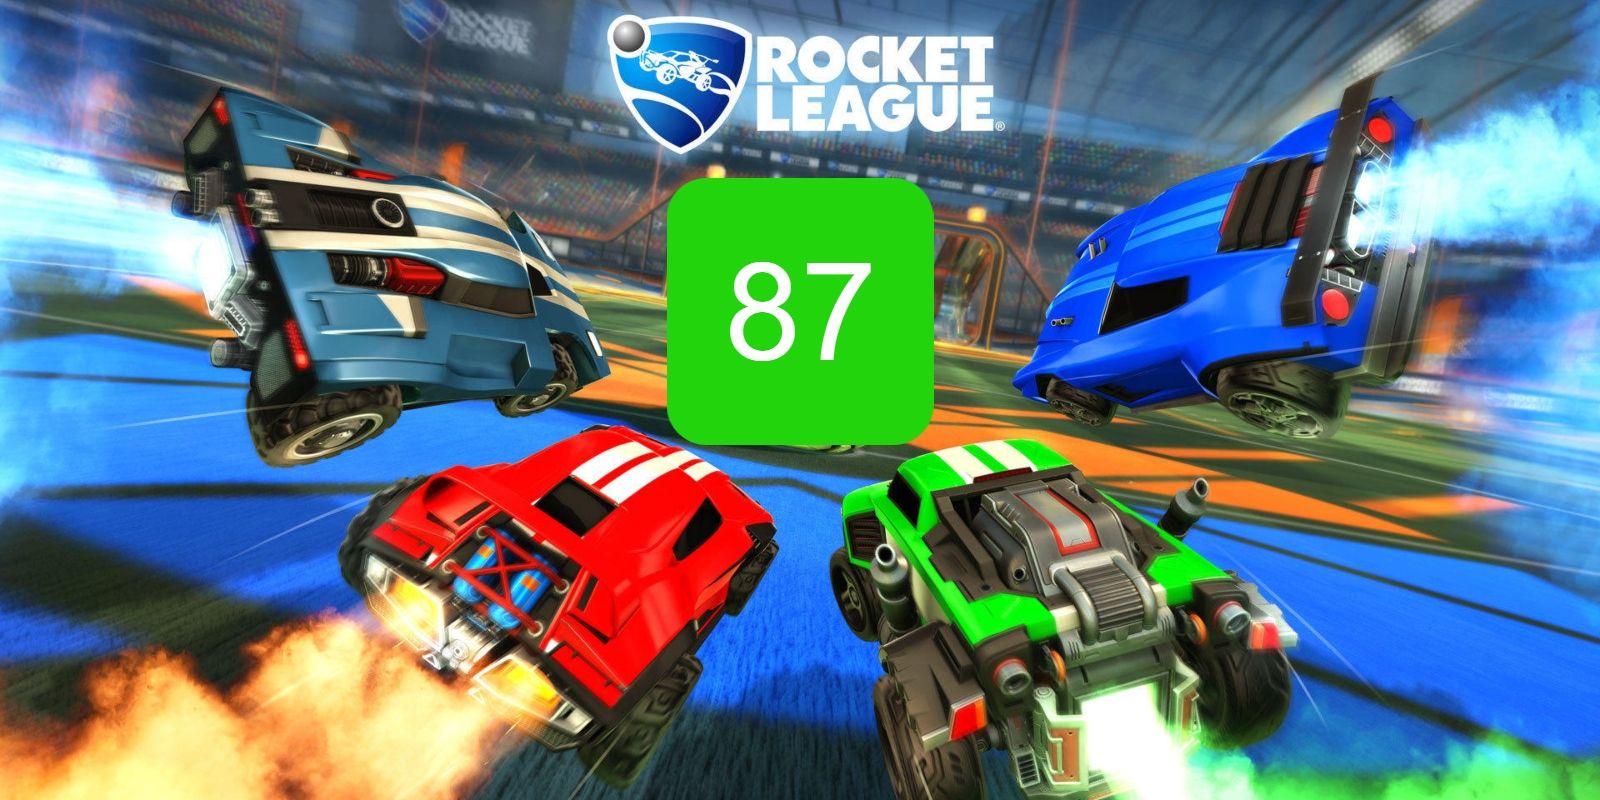 The Metascore for rocket league featuring four cars from the game